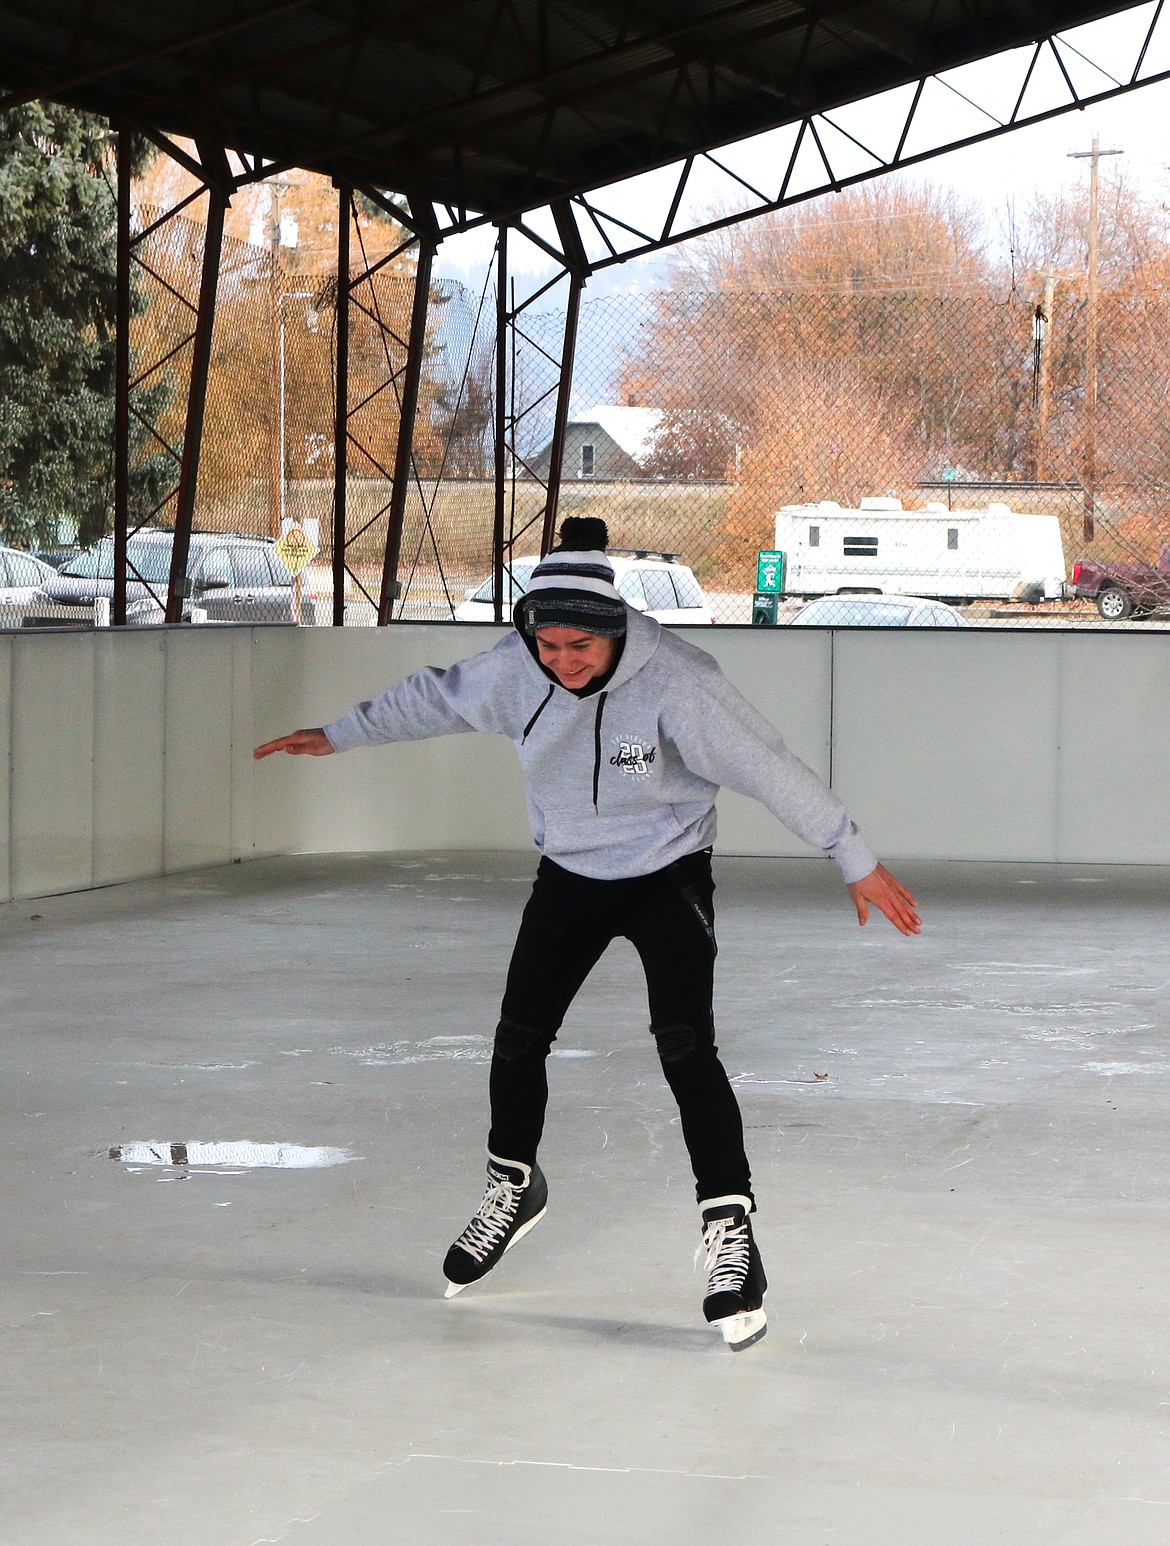 Photo by HECTOR MENDEZ JR.
Ben Tompkins, who gave the opening speech at the grand opening, tries out the ice rink.